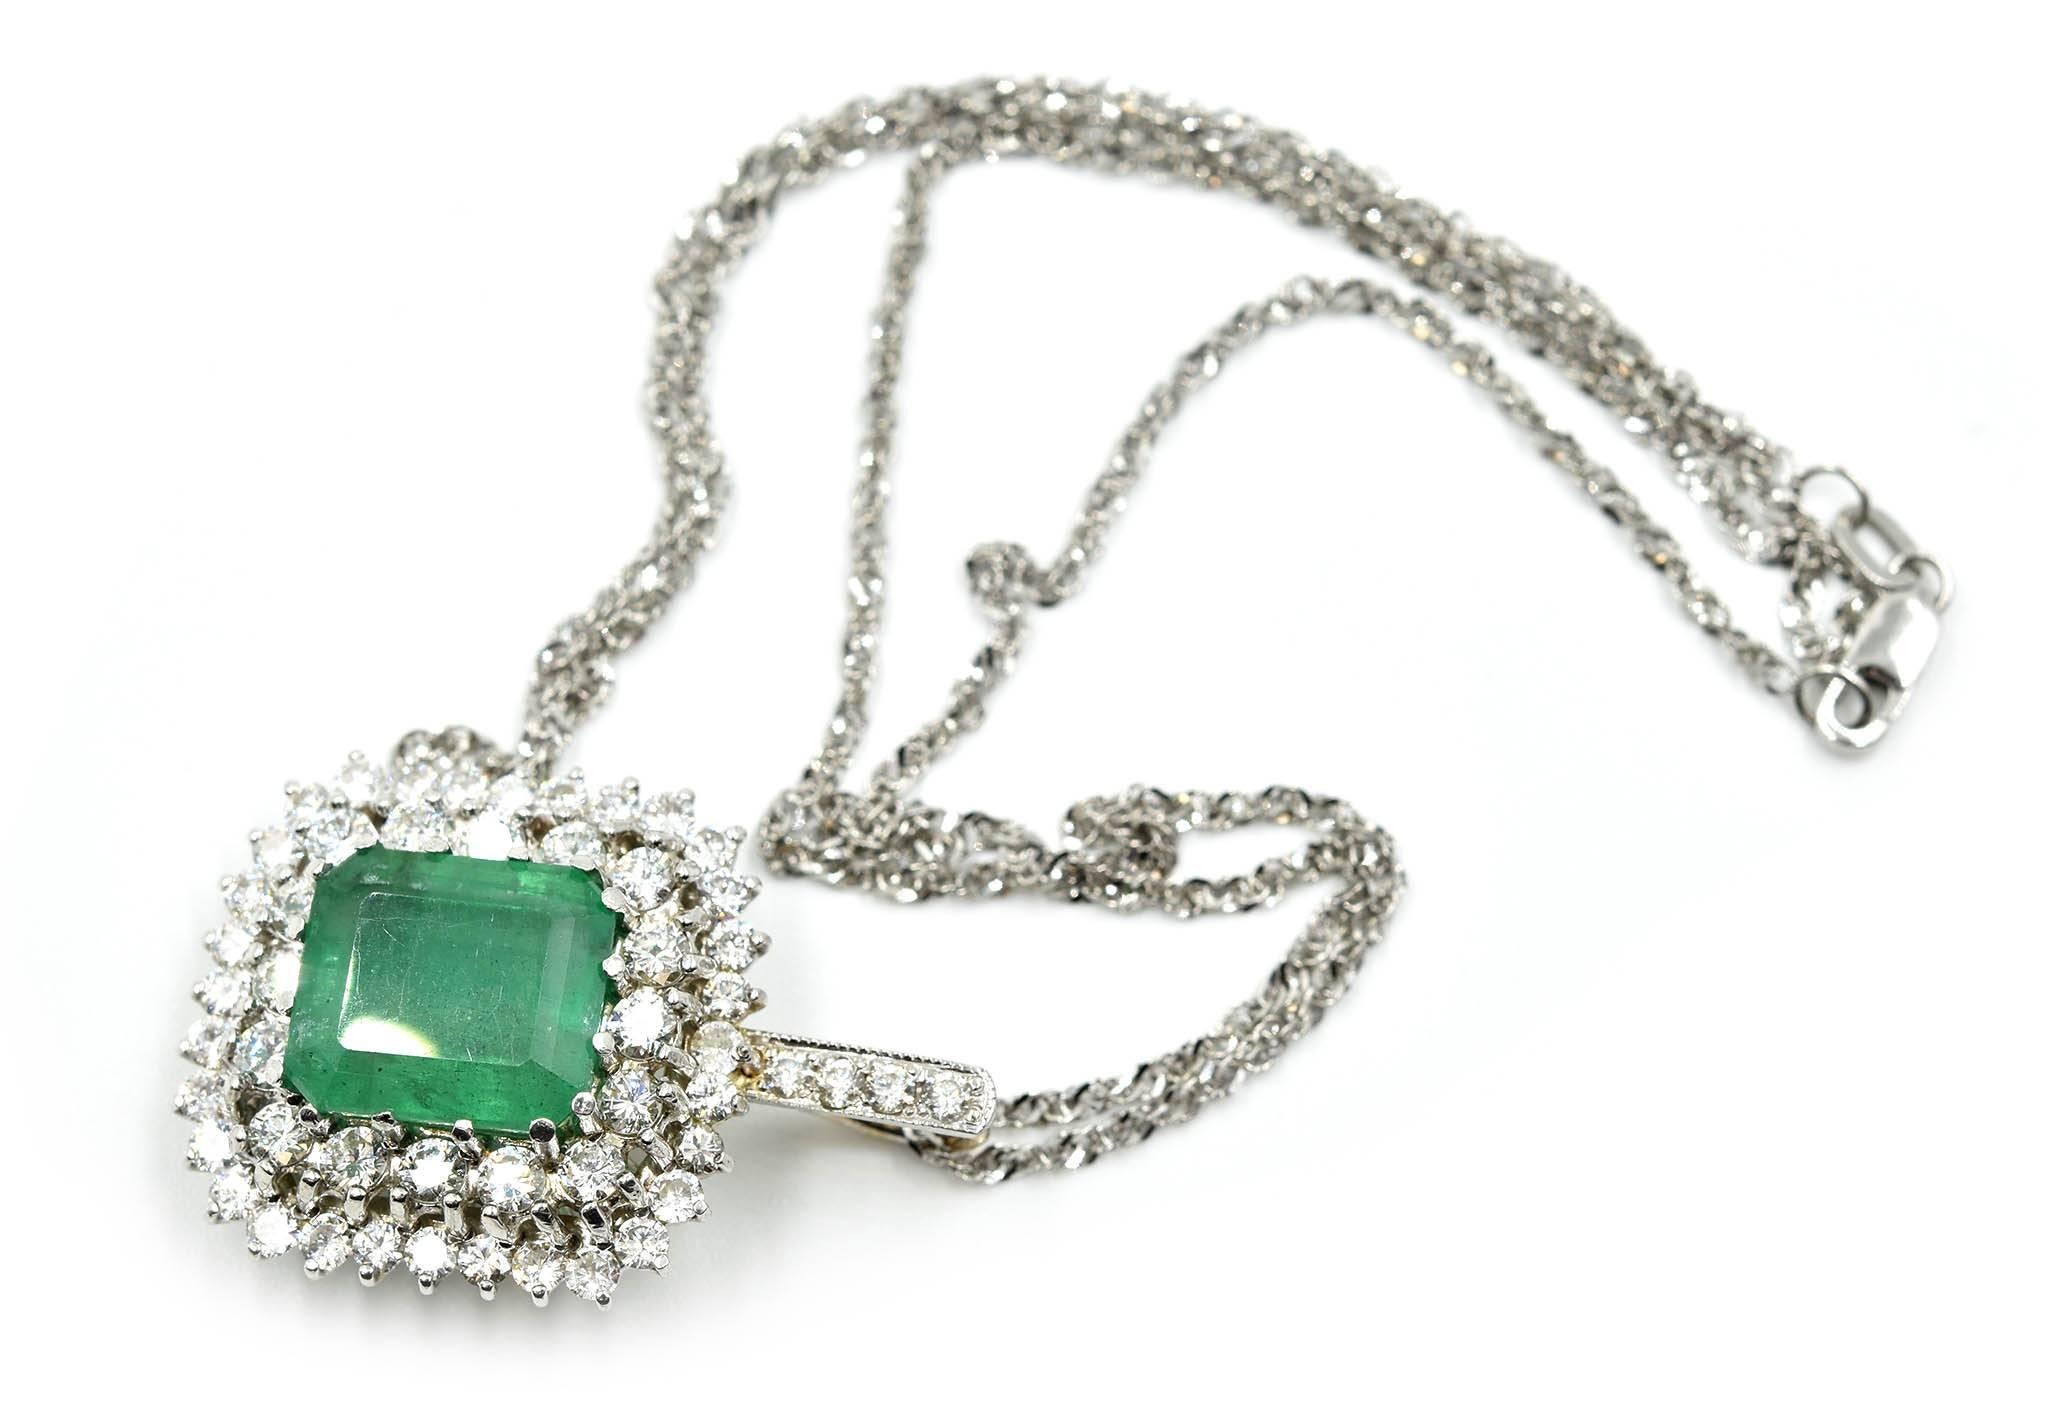 This ladies’ pendant consists of 3.00 carats of diamonds with a tremendous emerald set in the center! The diamonds form two halos around the emerald. The emerald weighs 7.10 carats. The pendant is designed in 14k white gold. The awe-inspiring